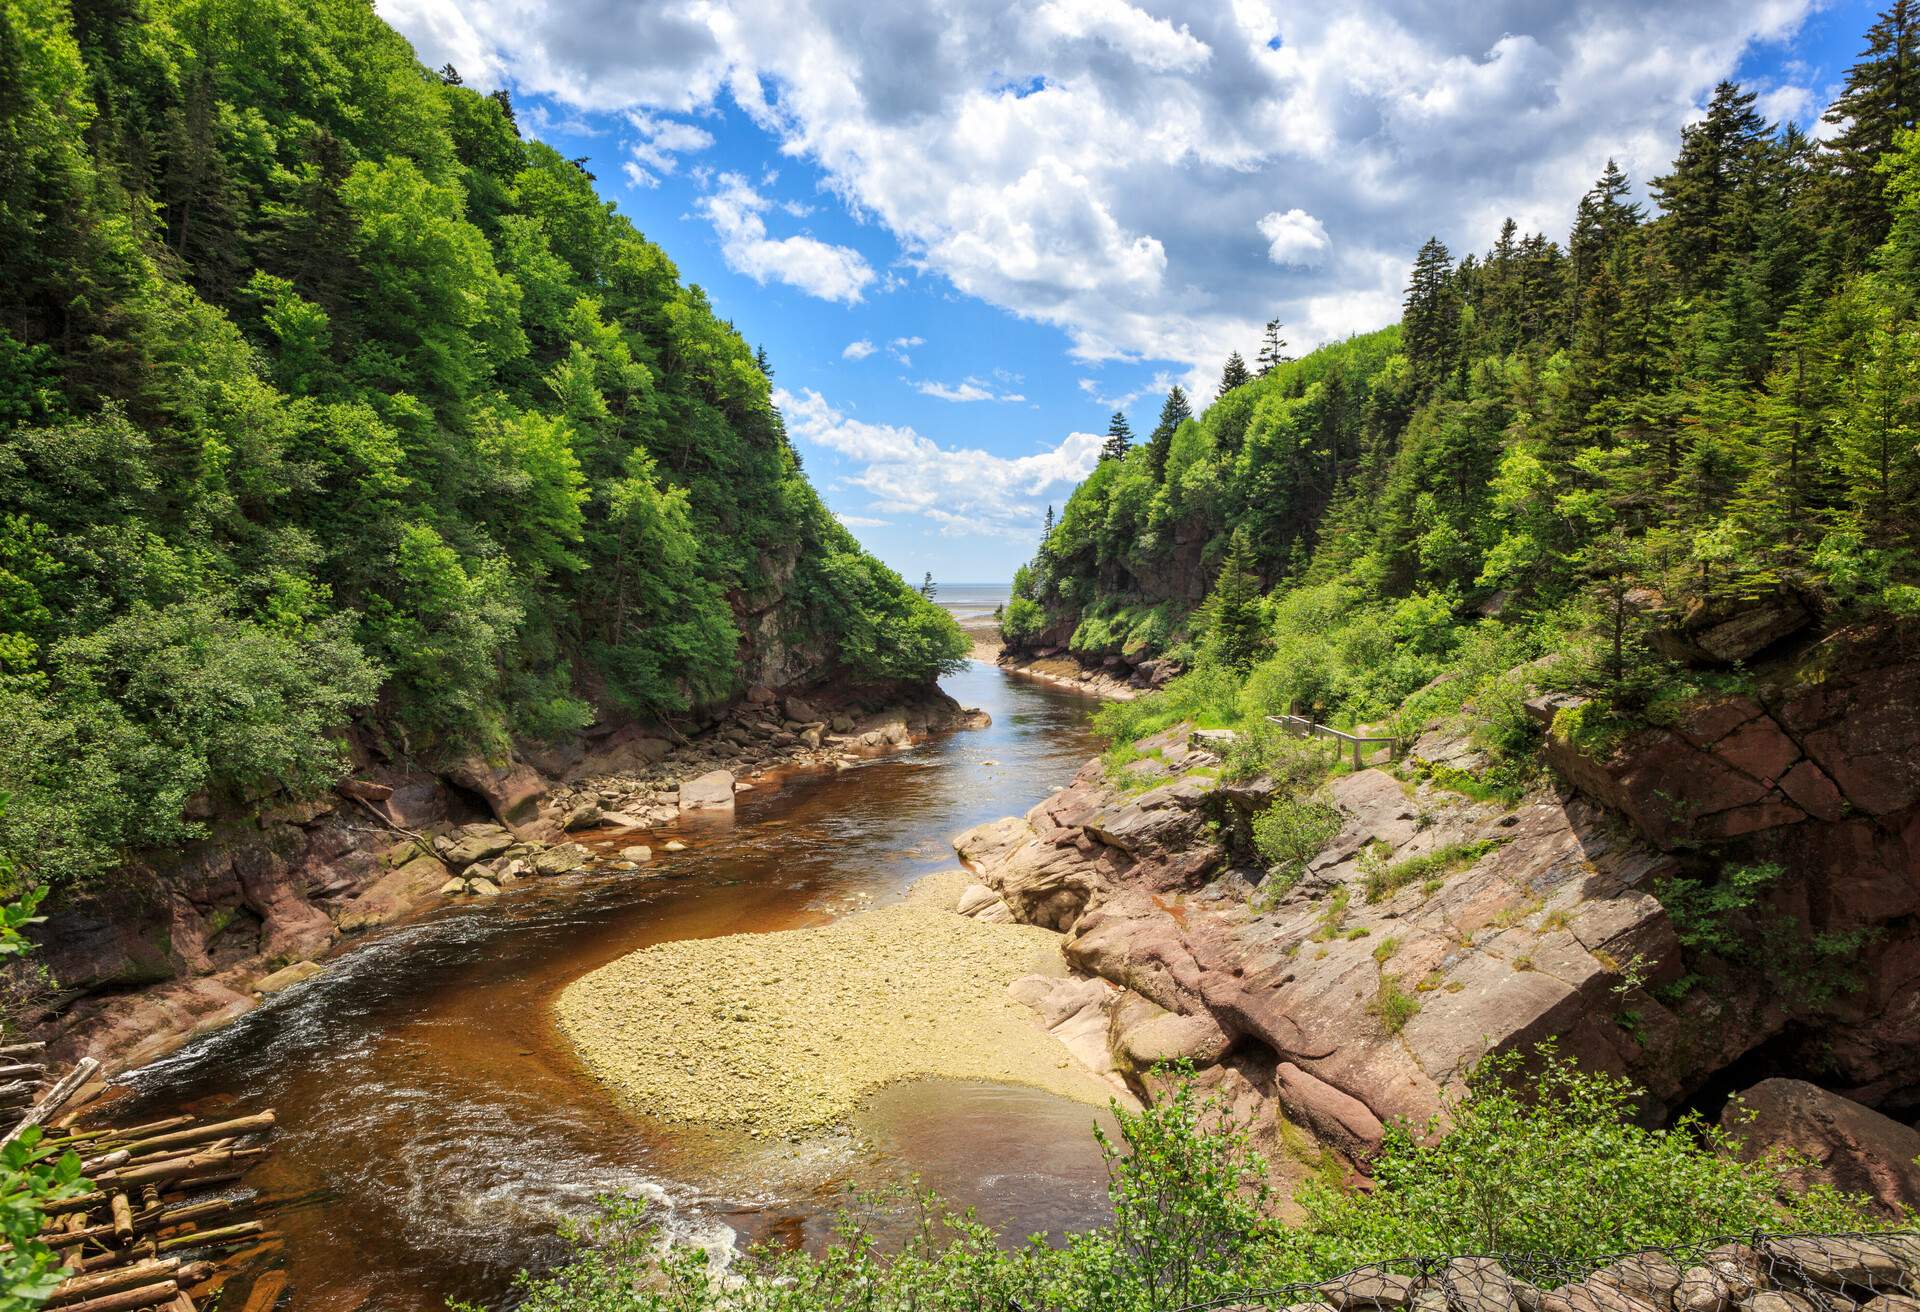 DEST_CANADA_FUNDY_NATIONAL_PARK_GettyImages-504684433